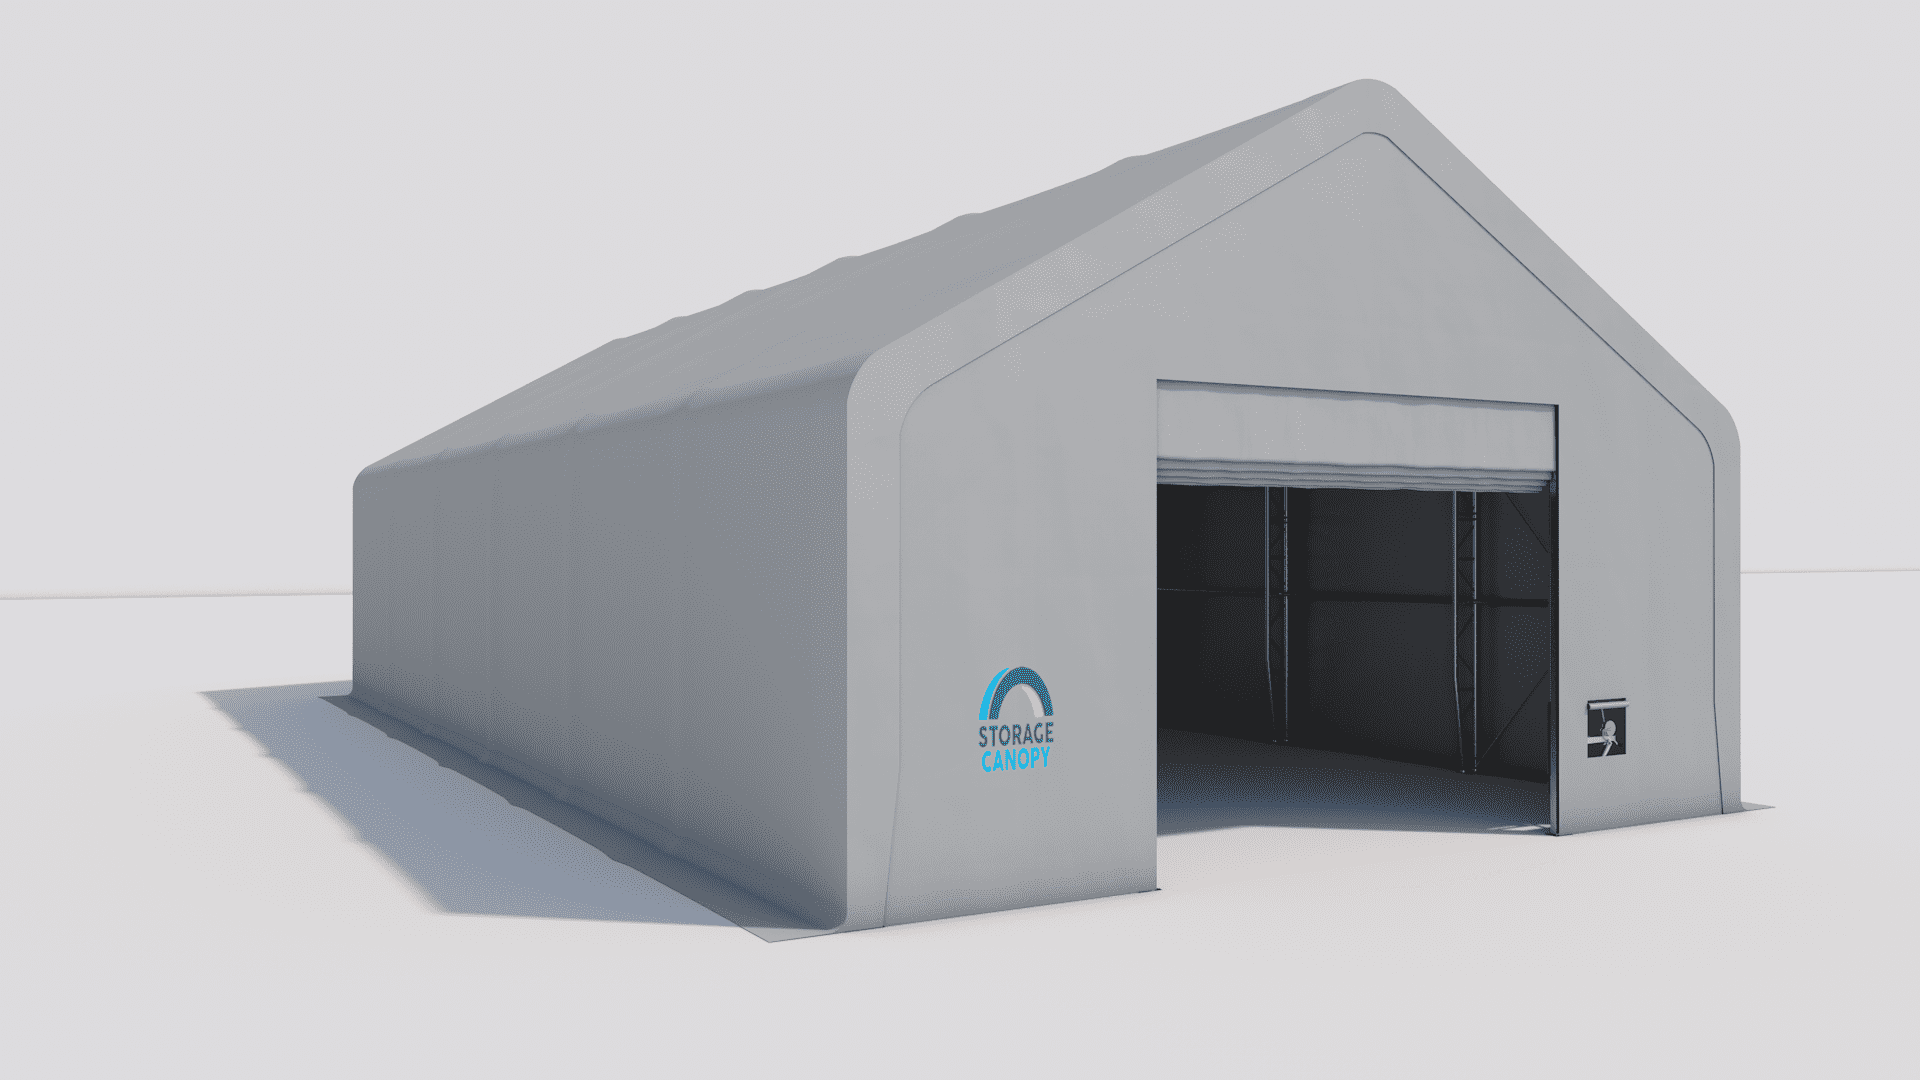 fabric building 30W 60L 20H - persp left open grey